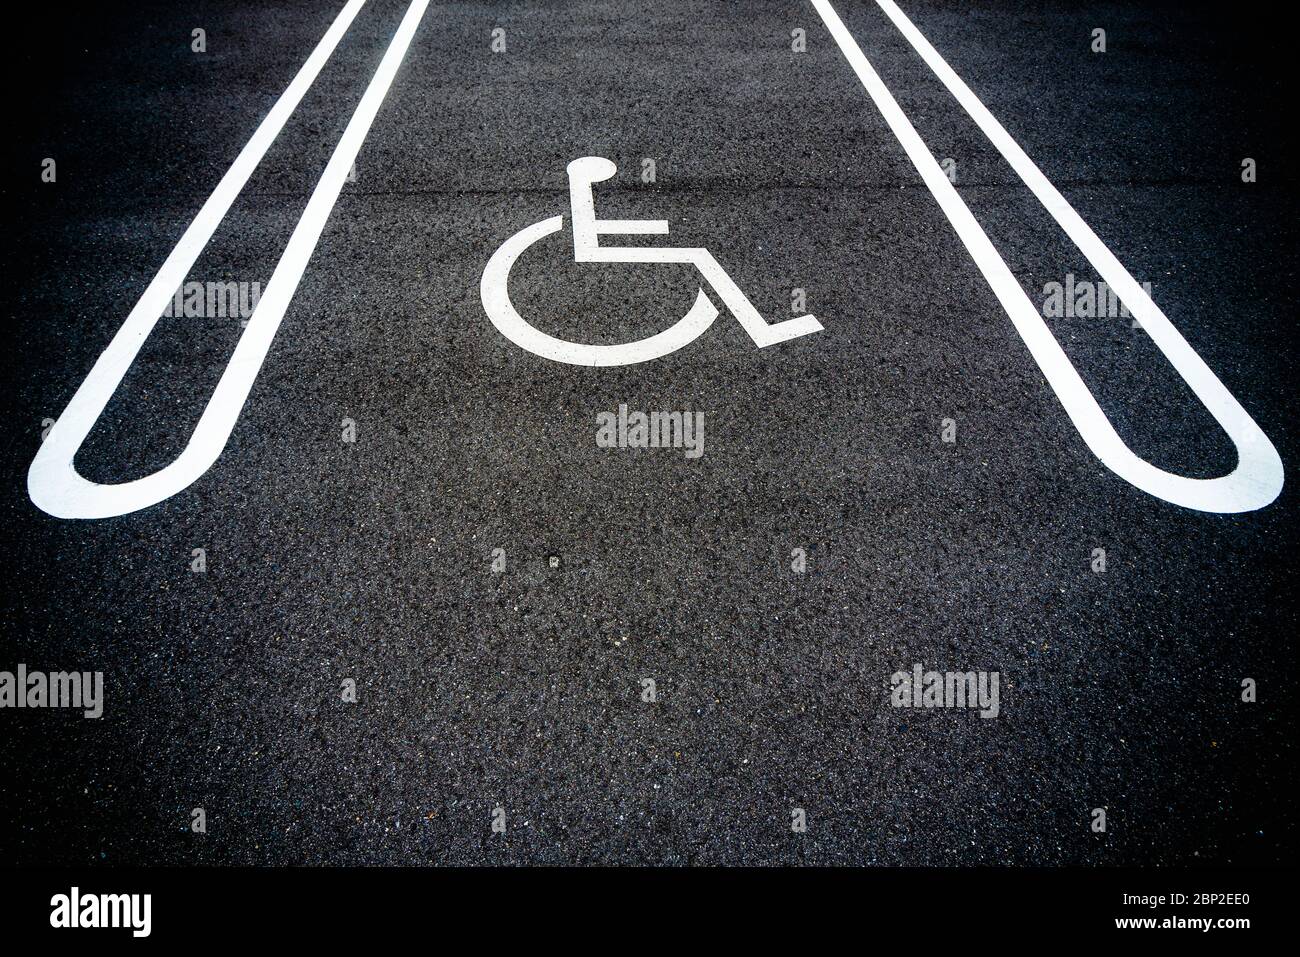 Parking space reserved for disabled people. Stock Photo